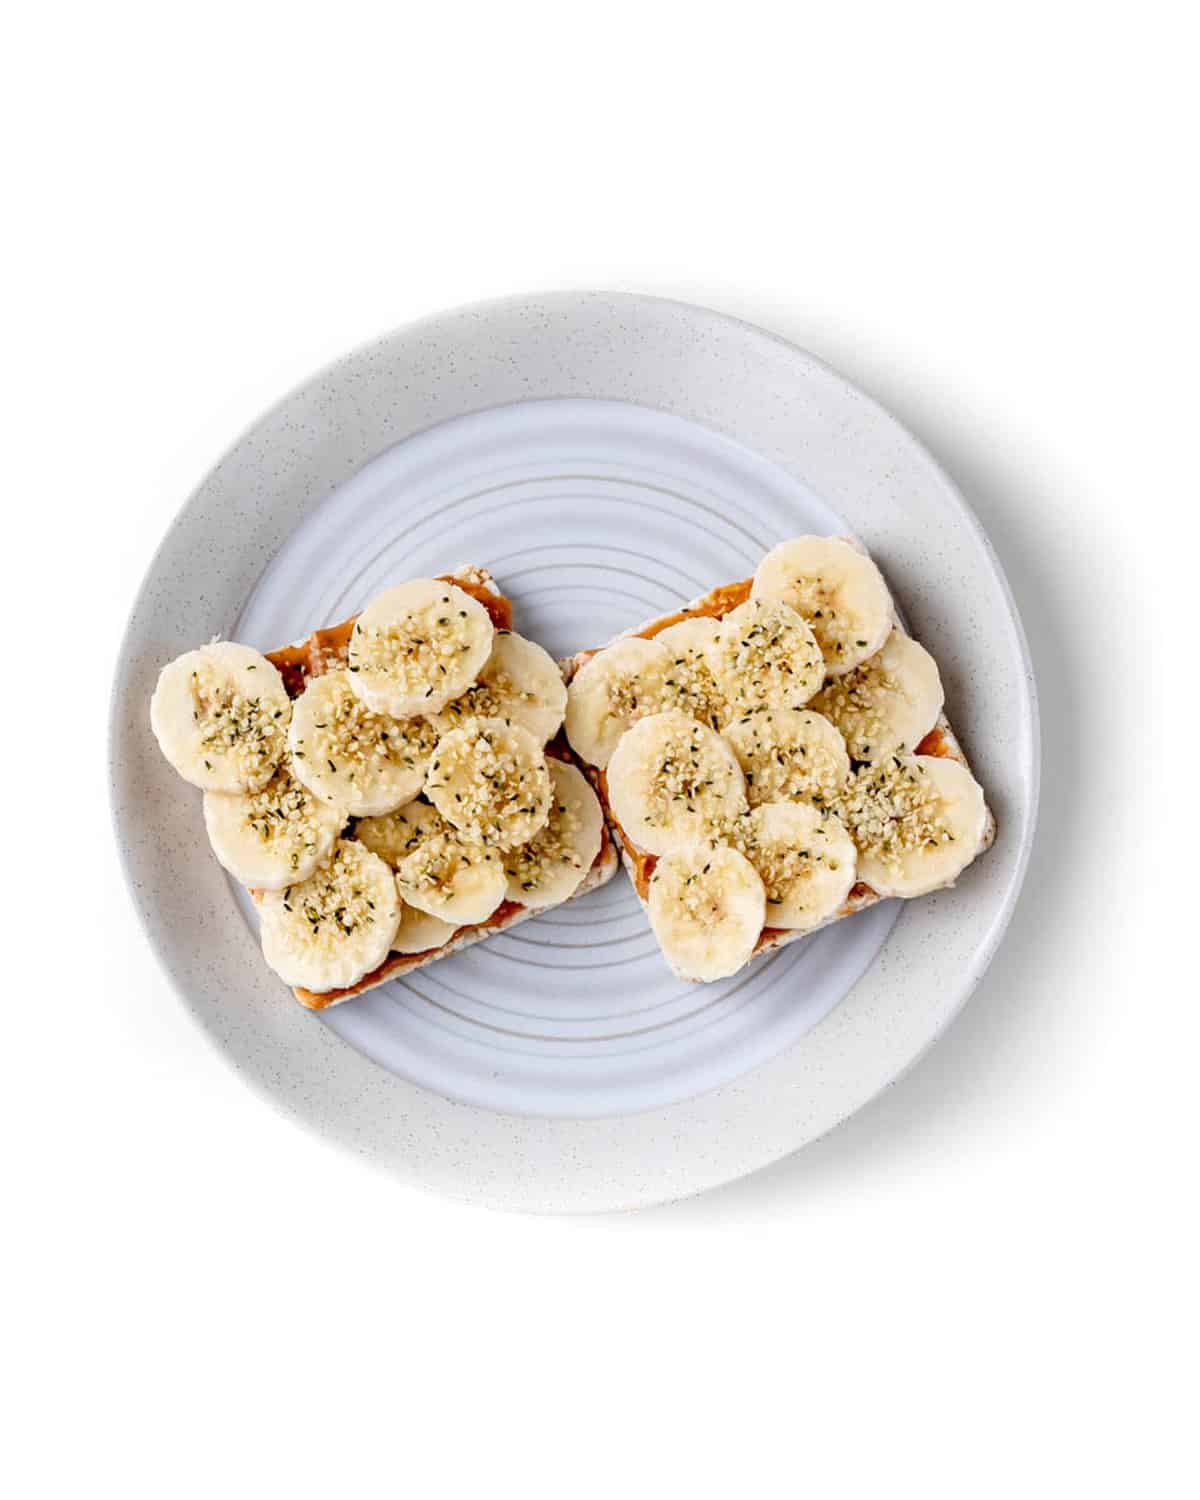 Peanut butter, banana and hemp hearts on two rice cakes on a plate.